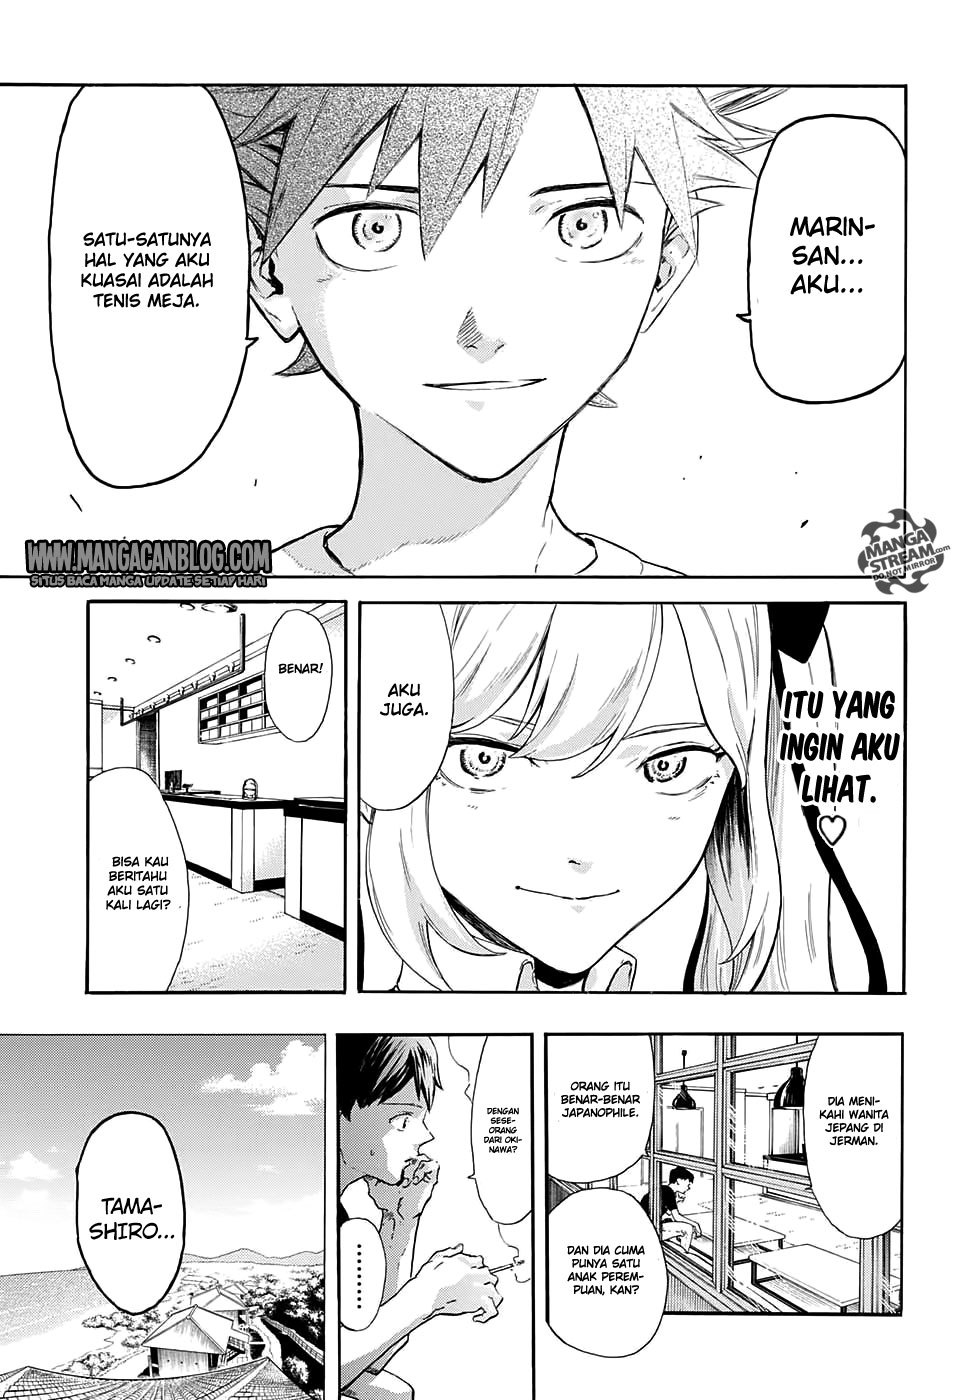 Full Drive Chapter 01